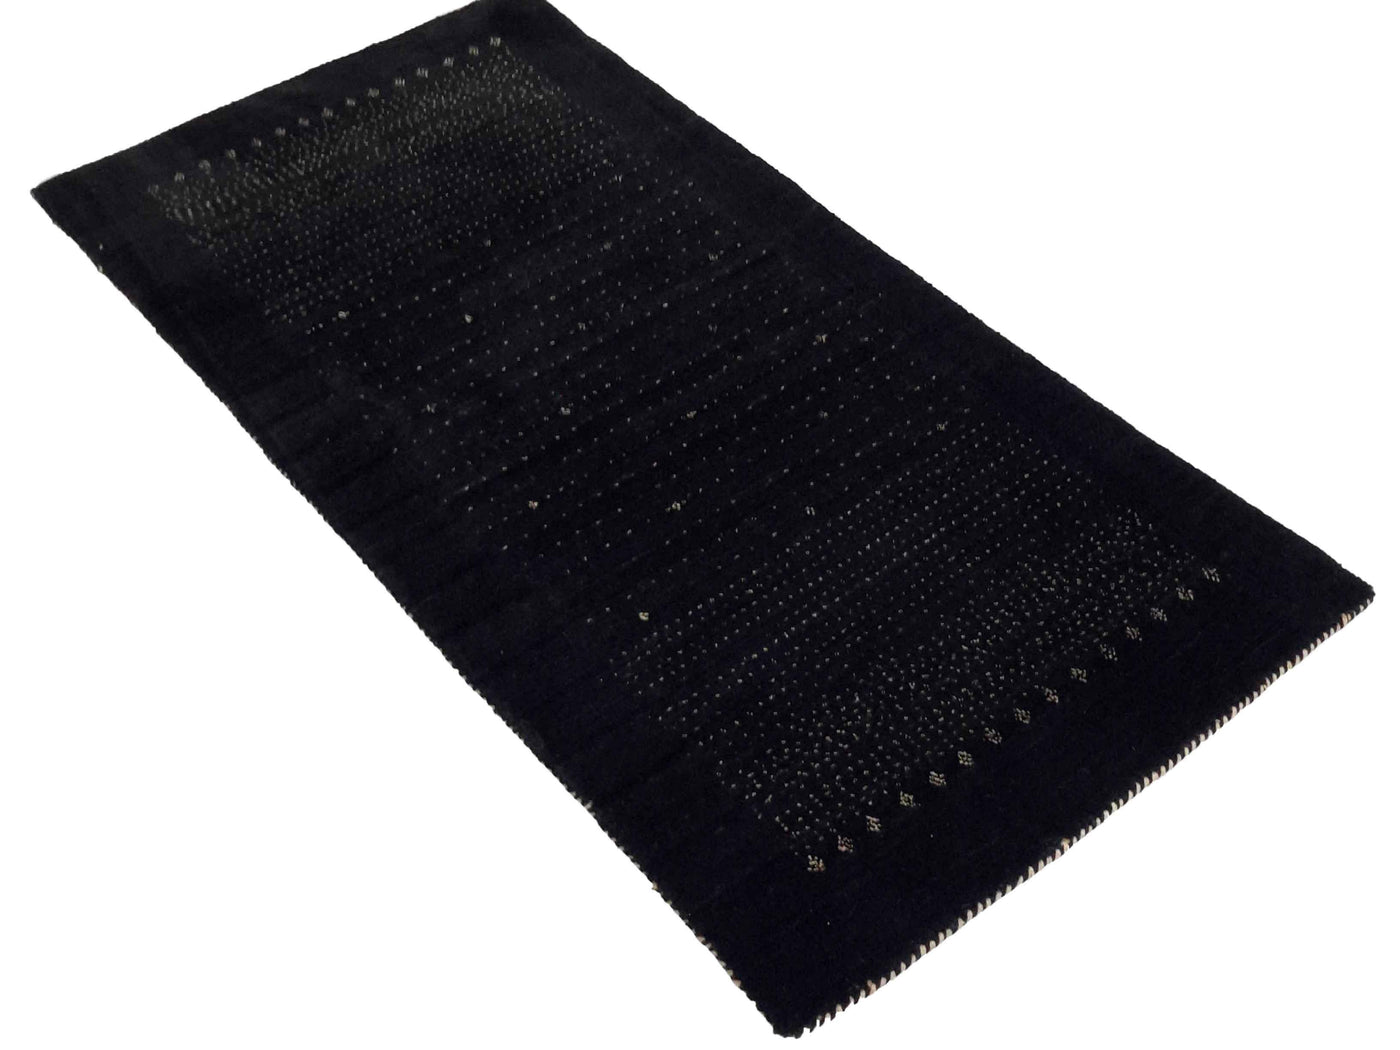 Canvello Hand Made Modern All Black Over Indo Gabbeh Rug - 2'4'' X 4'8''